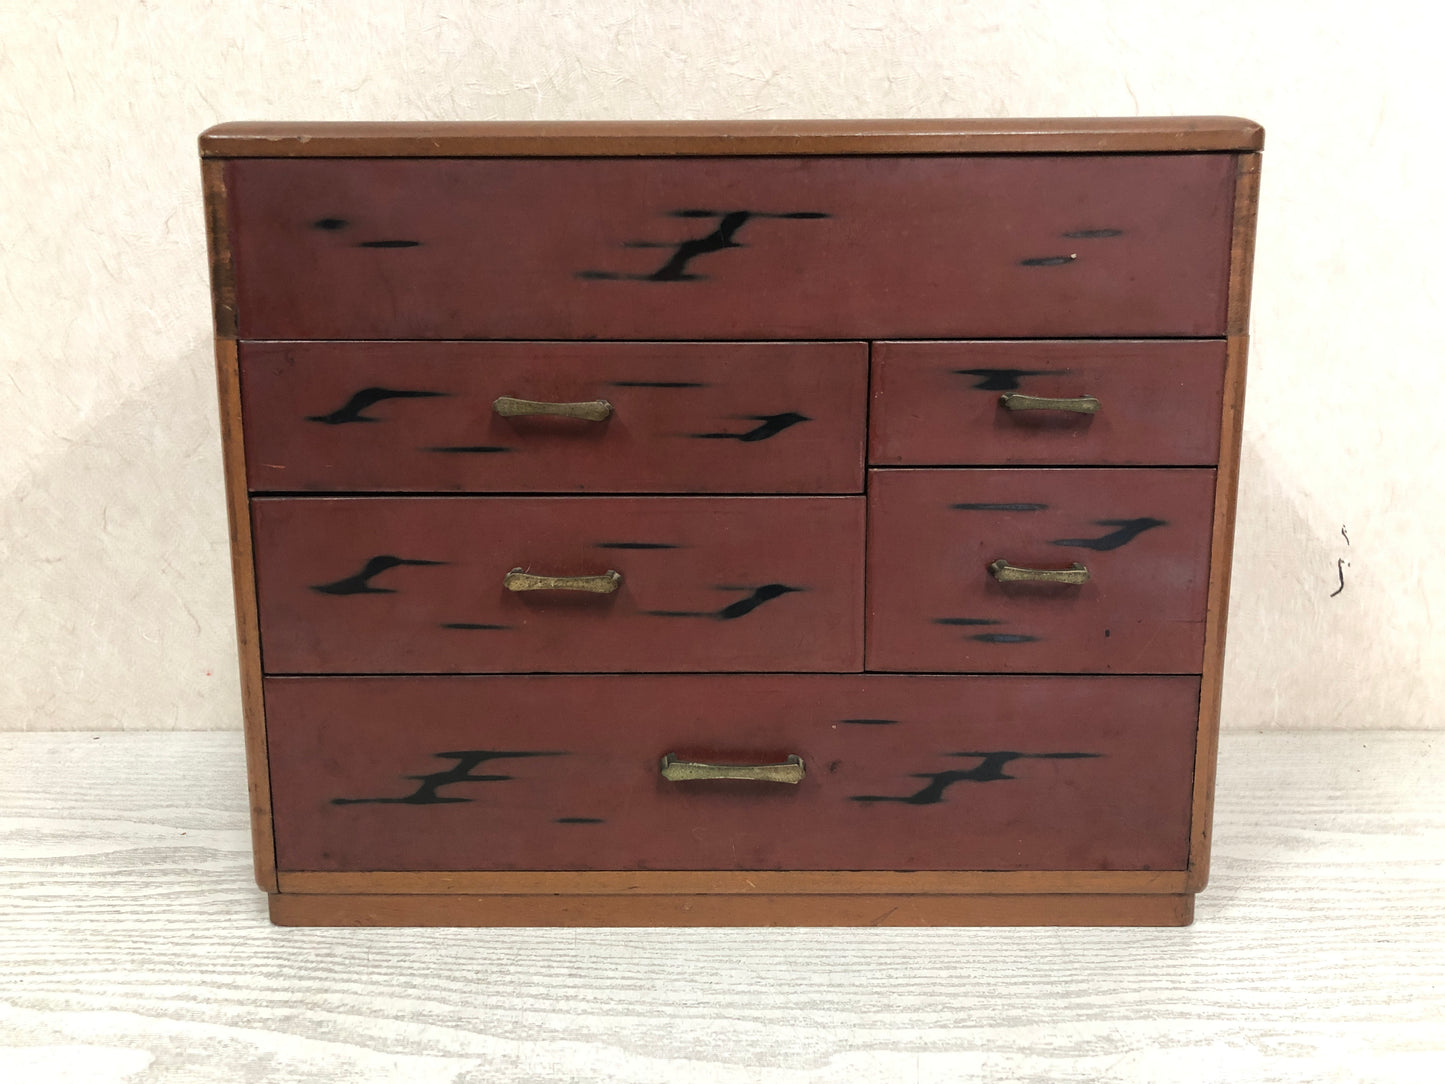 Y3851 TANSU Negoro Lacquer small chest of drawers sewing box Japan antique